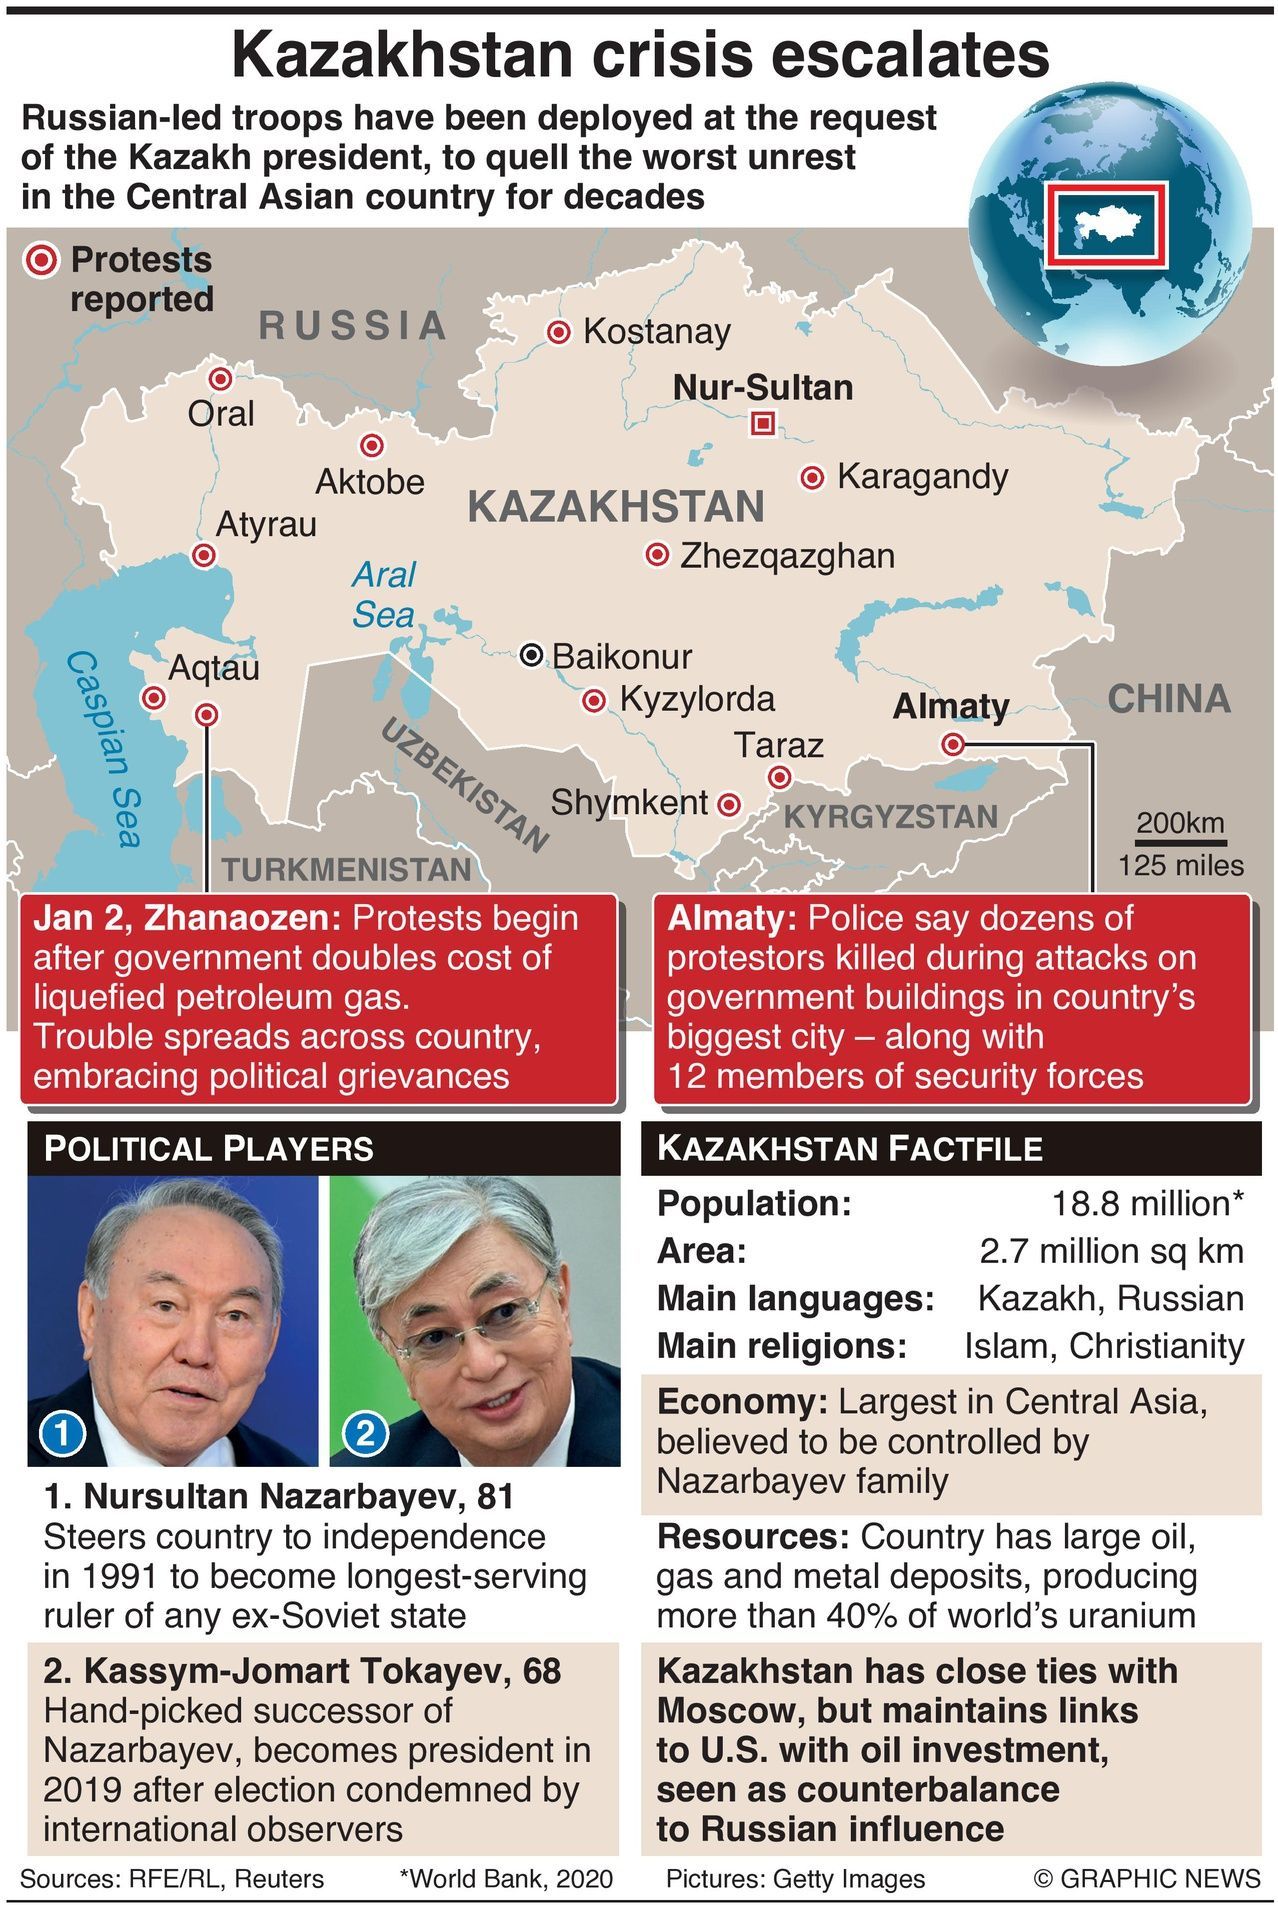 Kazakhstan Info graphic, everything you need to know about whats happening in Kazakhstan